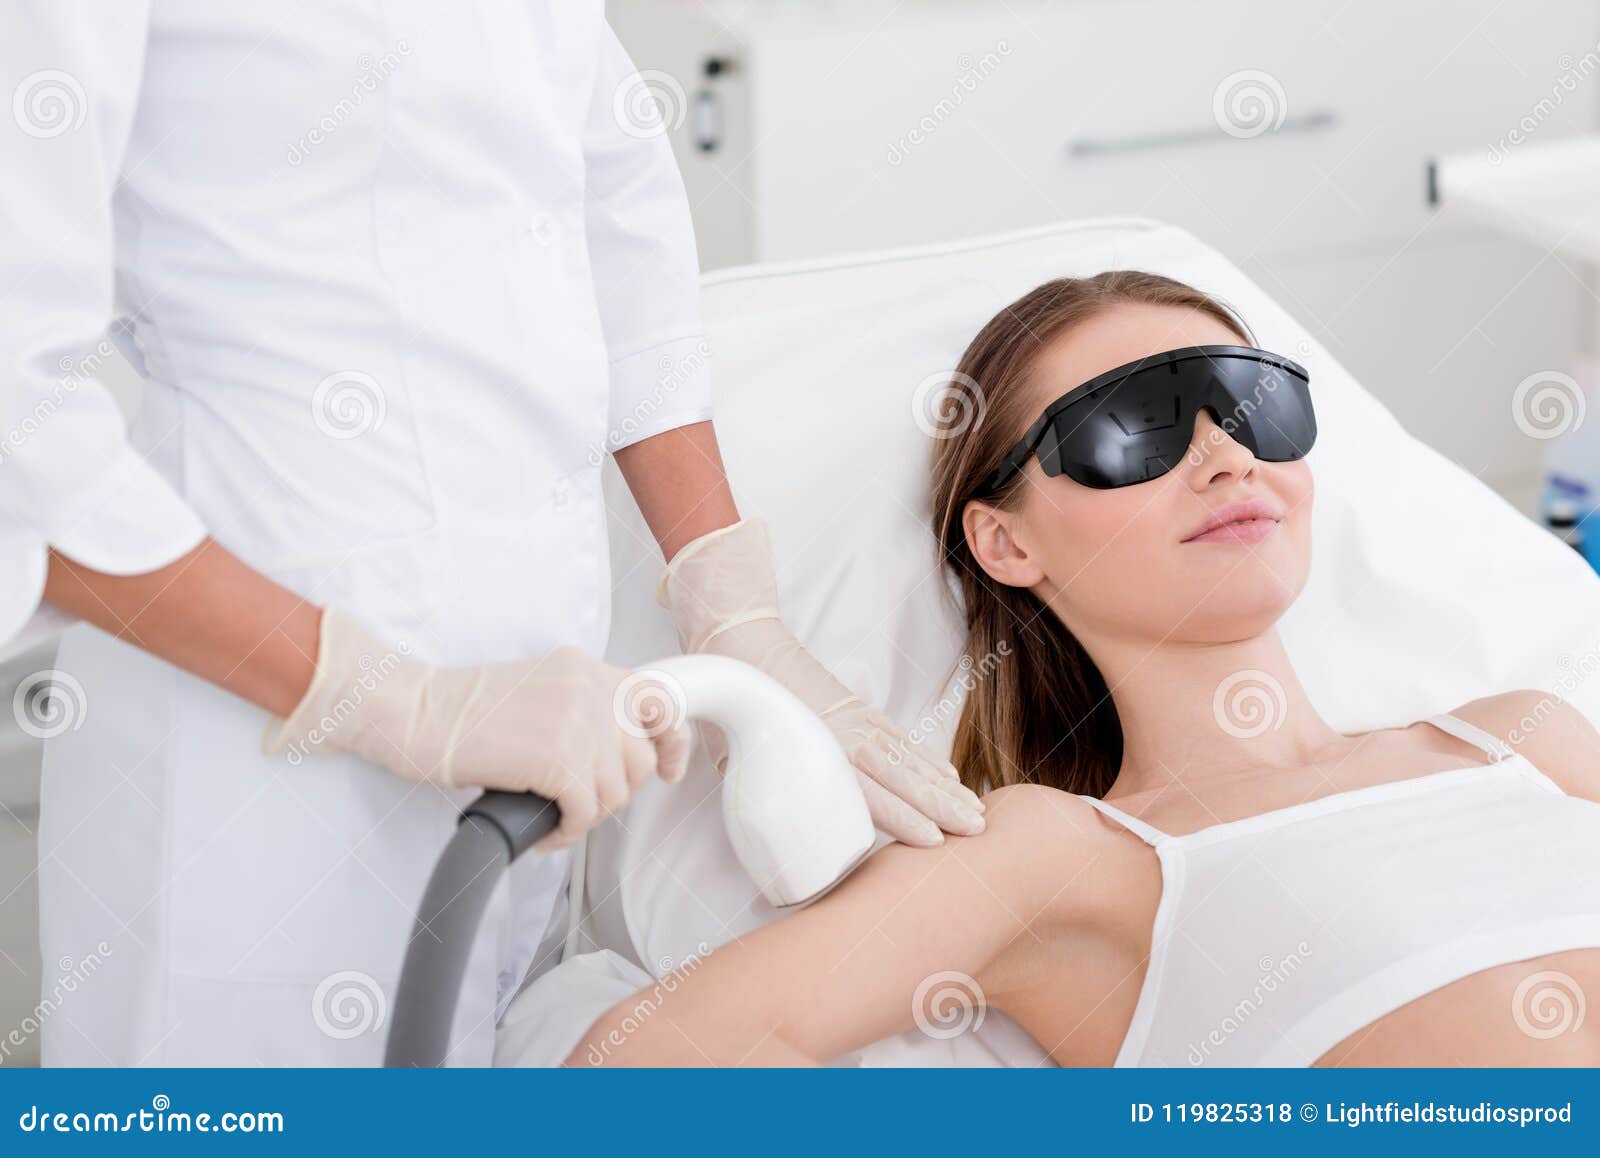 Partial View Of Woman Receiving Laser Hair Removal